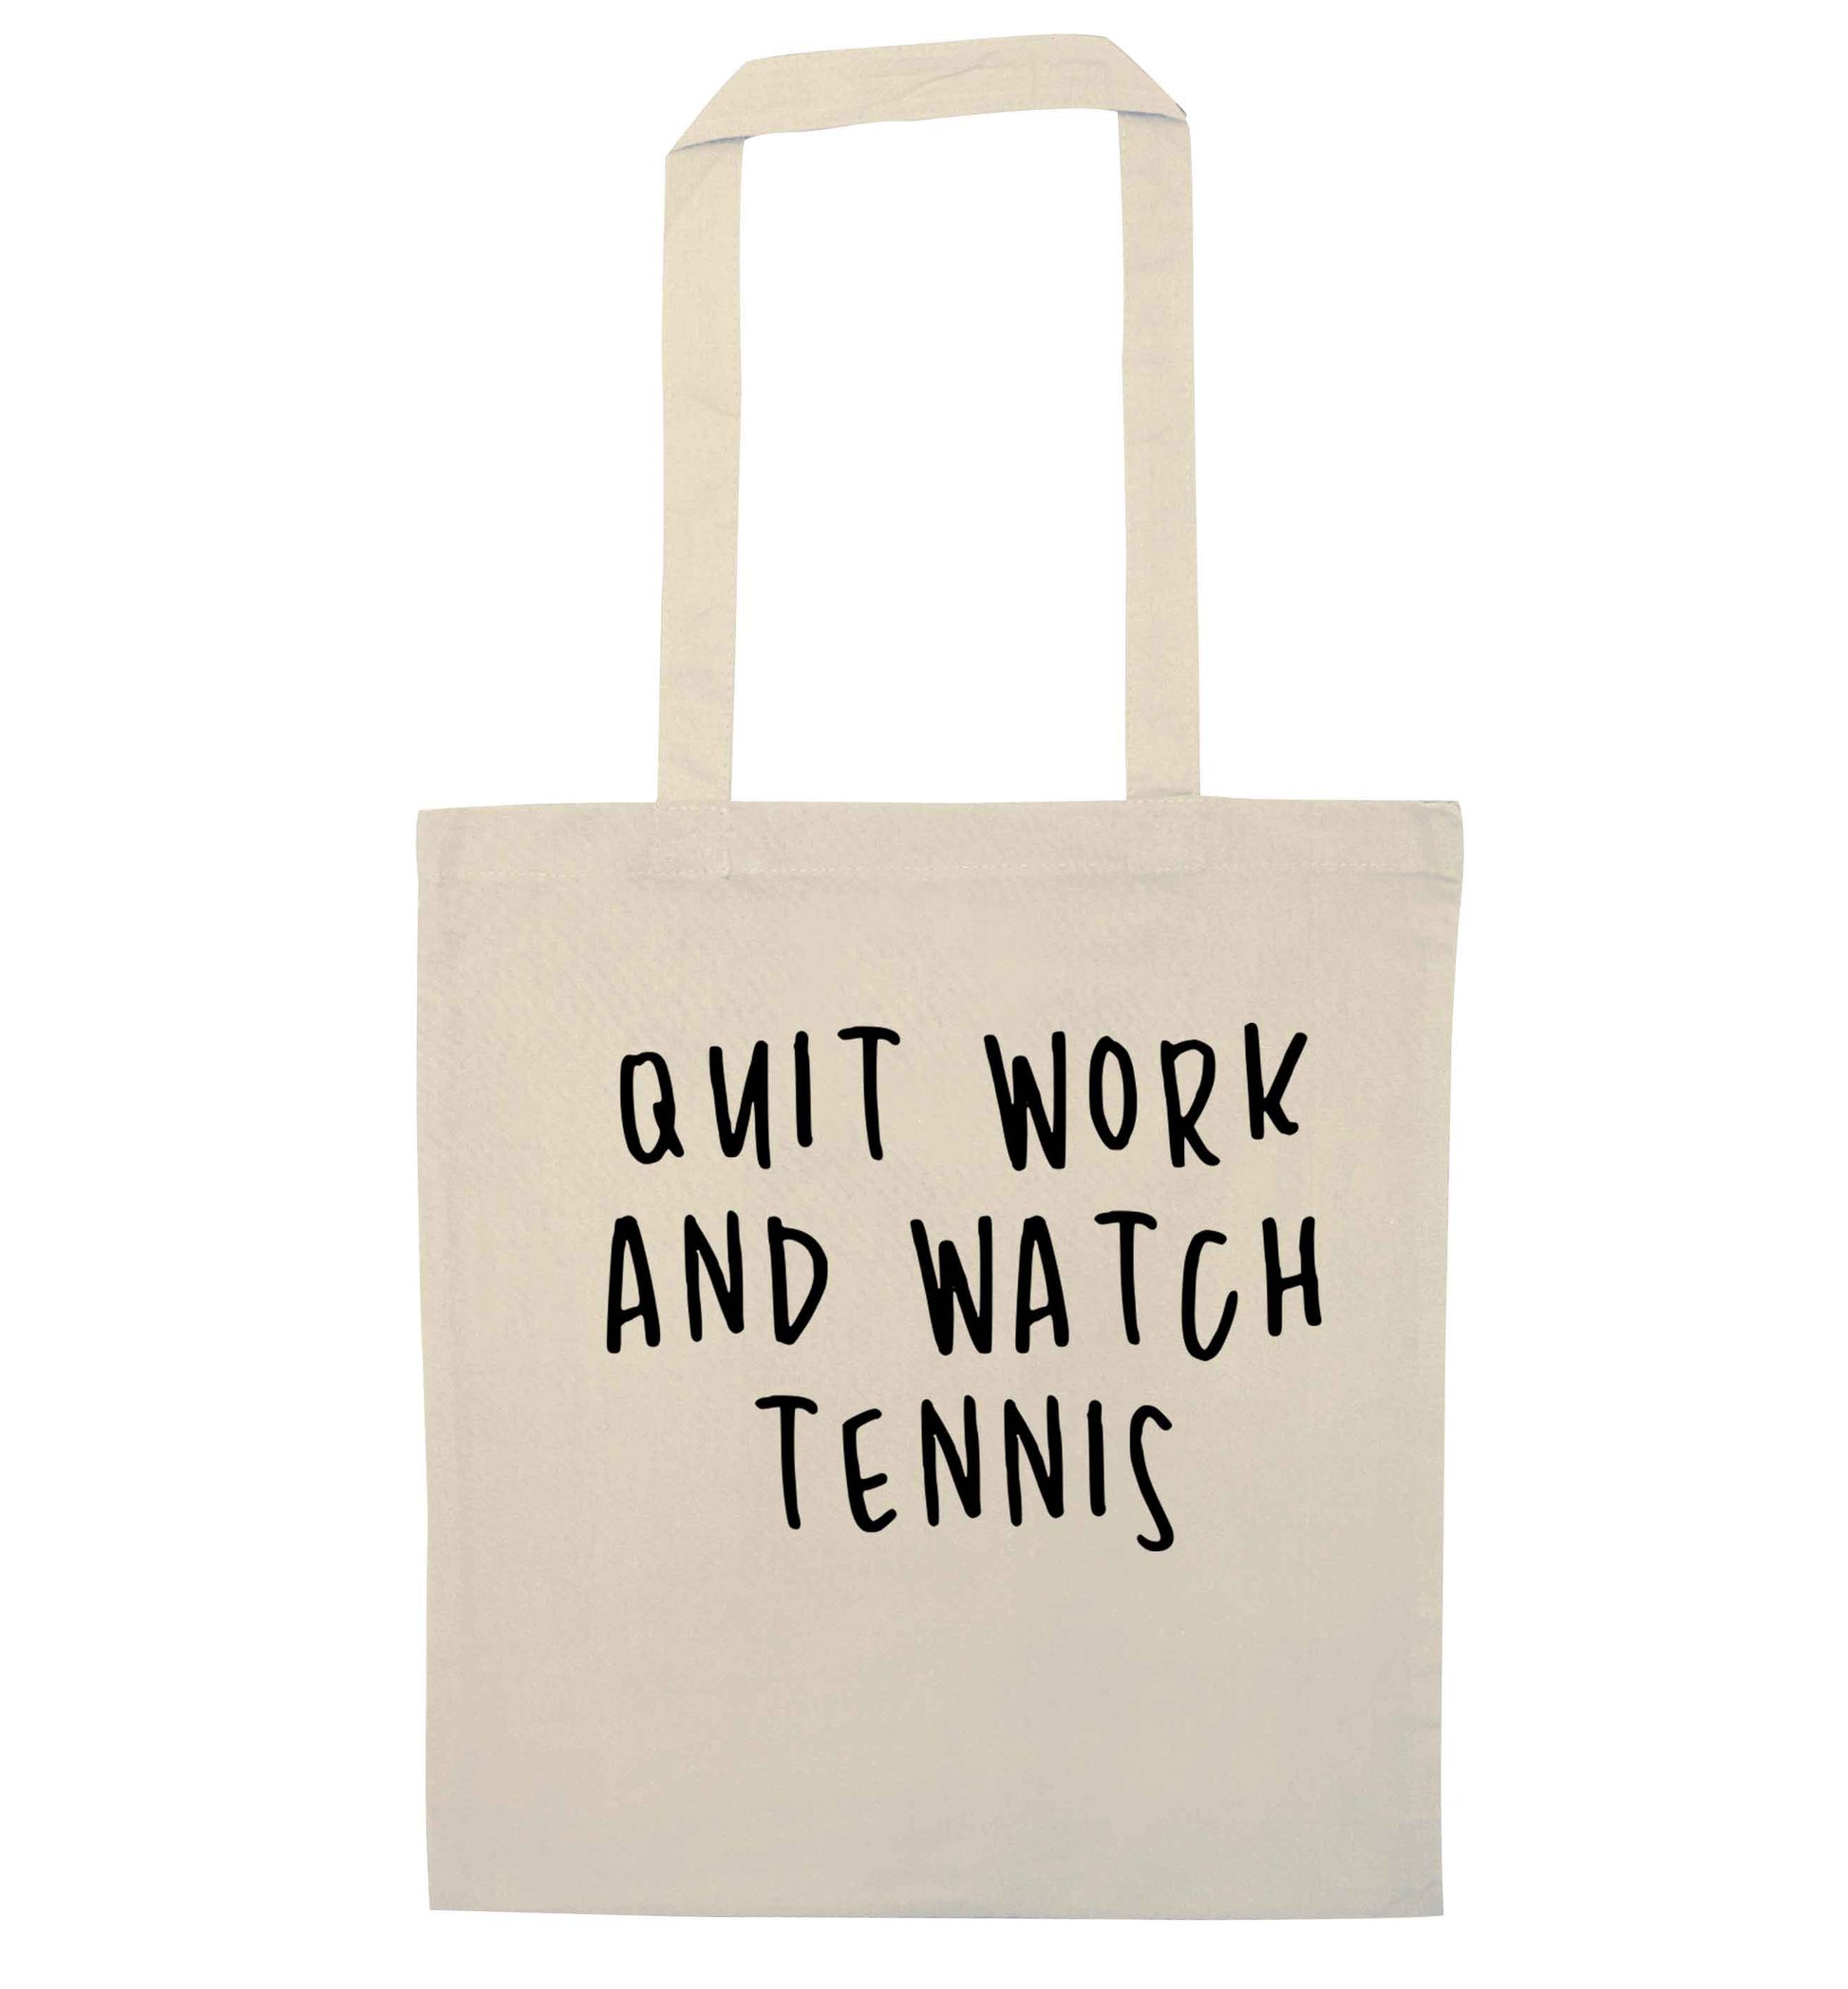 Quit work and watch tennis natural tote bag